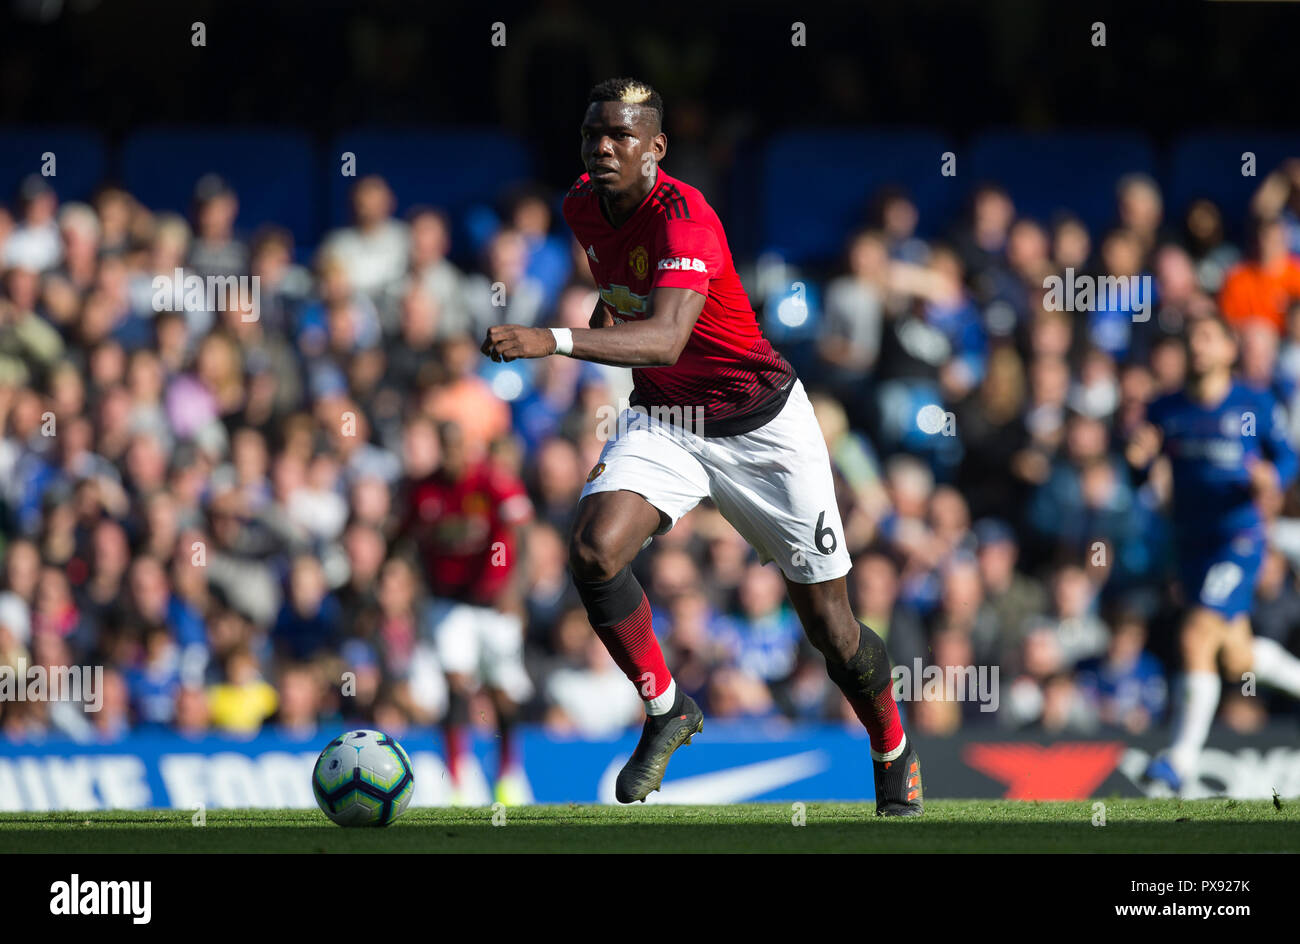 London, UK. 20th October 2018. Paul Pogba of Man Utd during the Premier League match between Chelsea and Manchester United at Stamford Bridge, London, England on 20 October 2018.  **EDITORIAL USE ONLY** - Photo by Andy Rowland / PRiME Media Images. Credit: Andrew Rowland/Alamy Live News Stock Photo